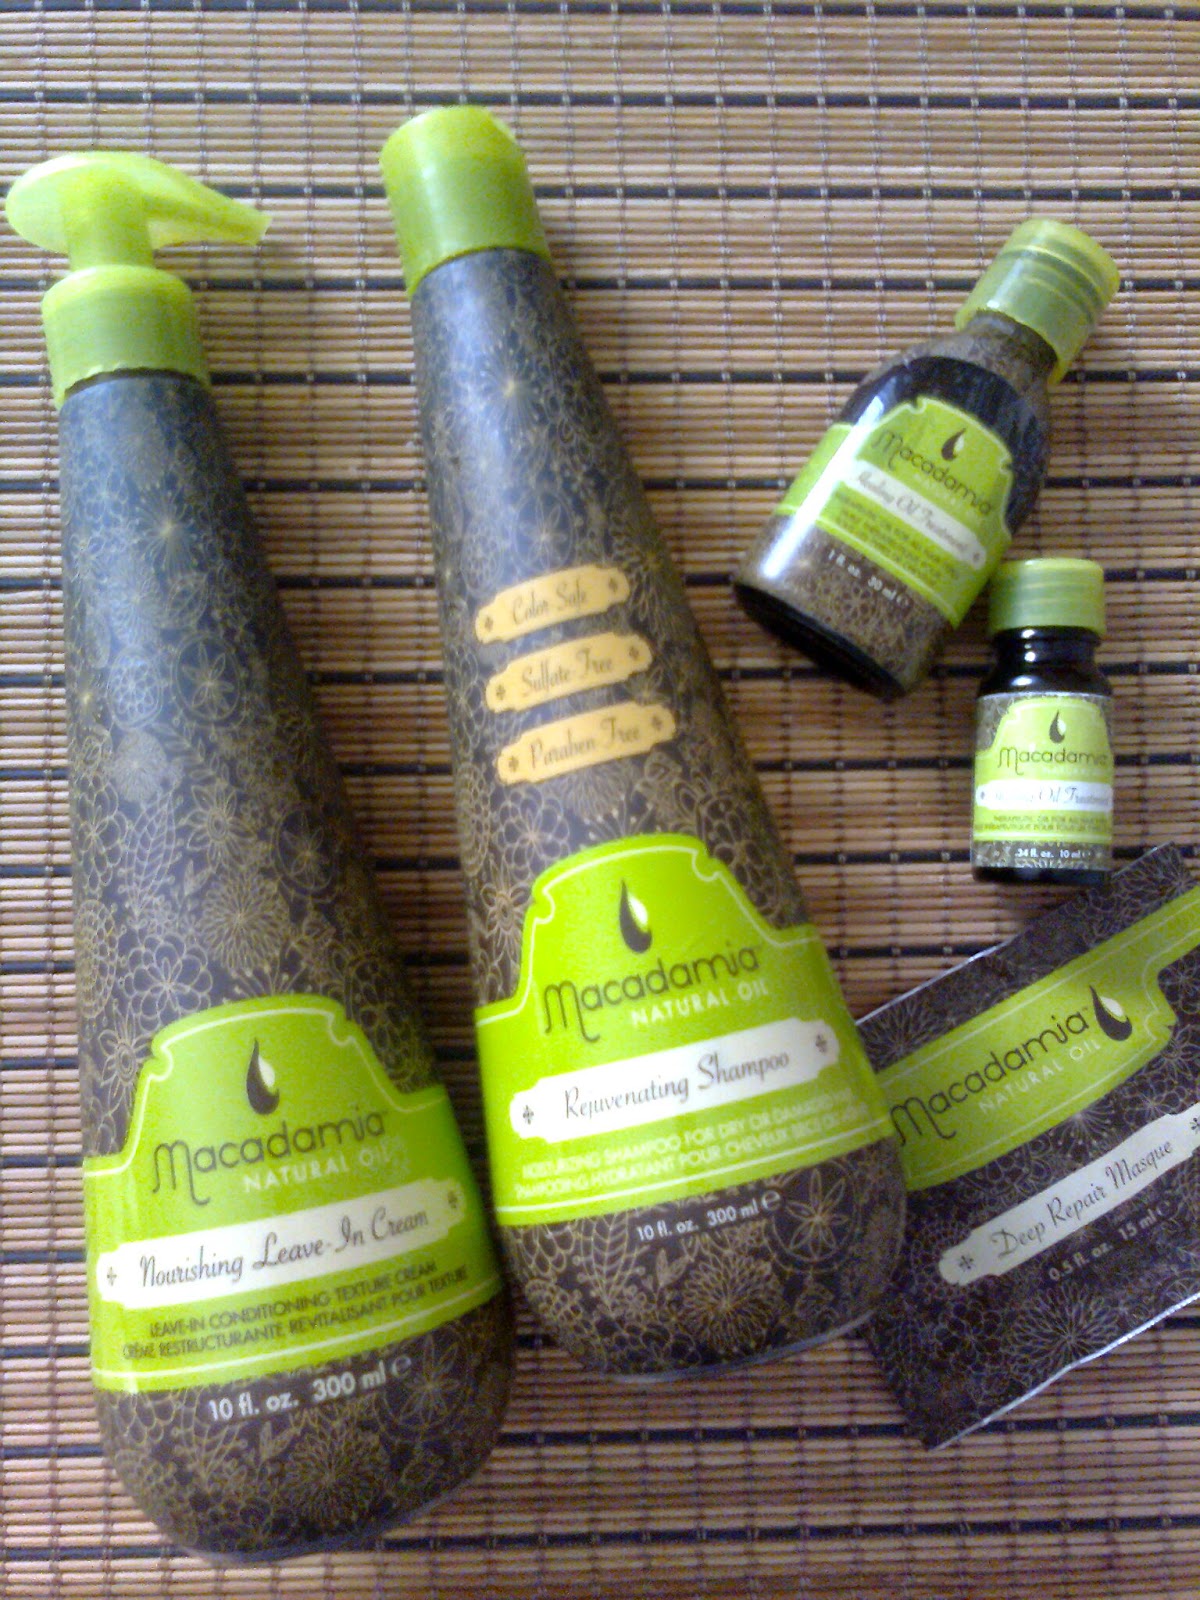 Macadamia Natural Oil products